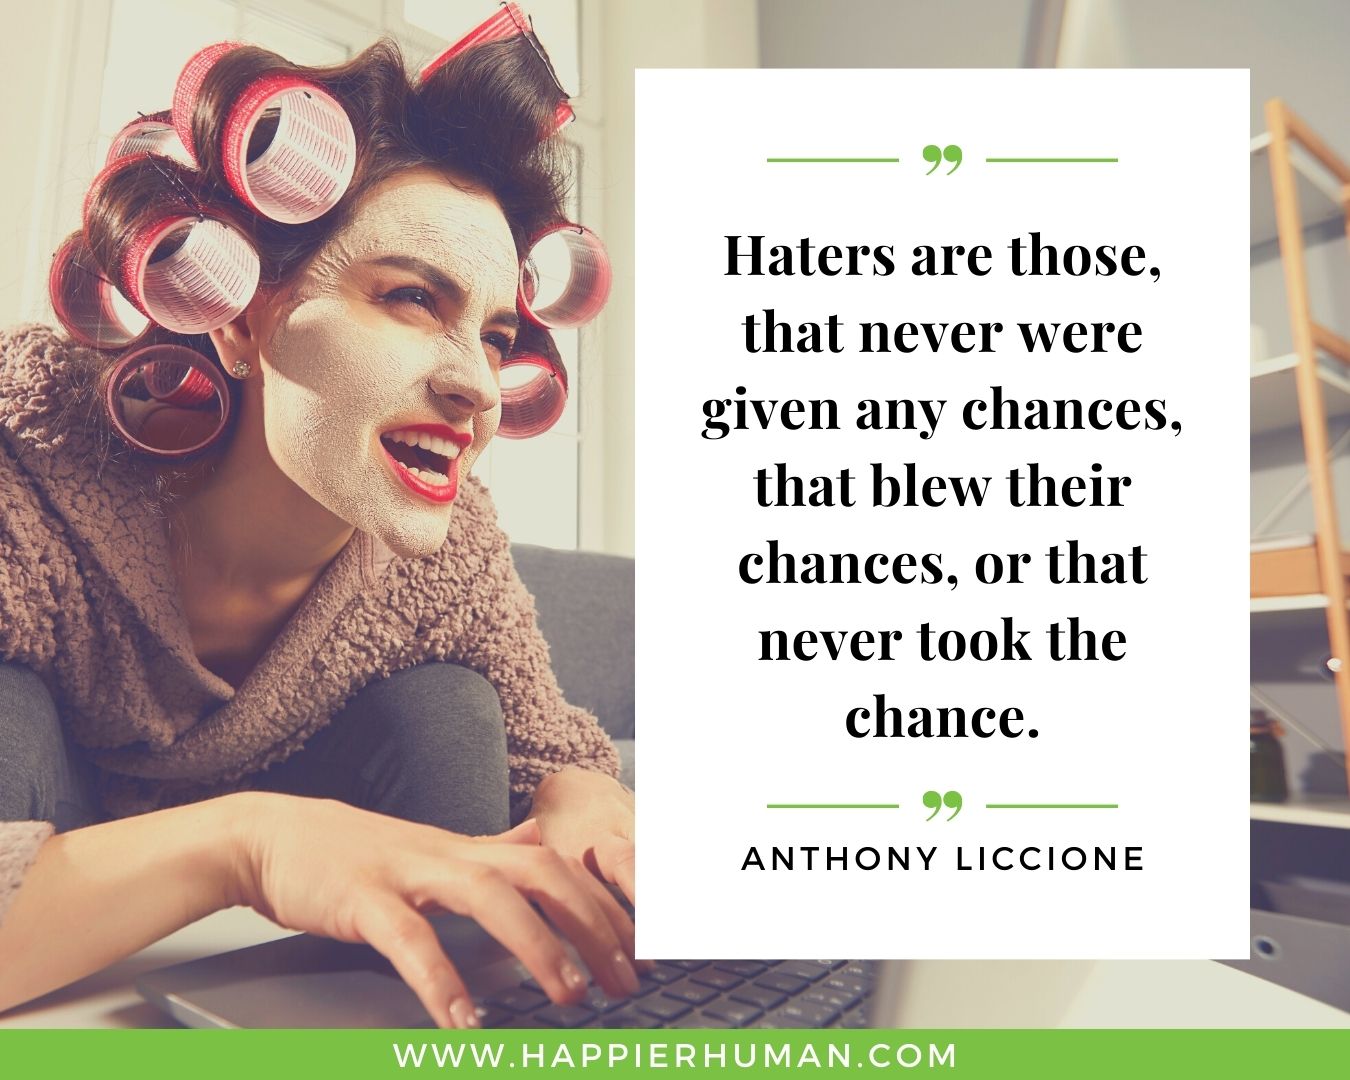 Haters Quotes - “Haters are those, that never were given any chances, that blew their chances, or that never took the chance.” - Anthony Liccione